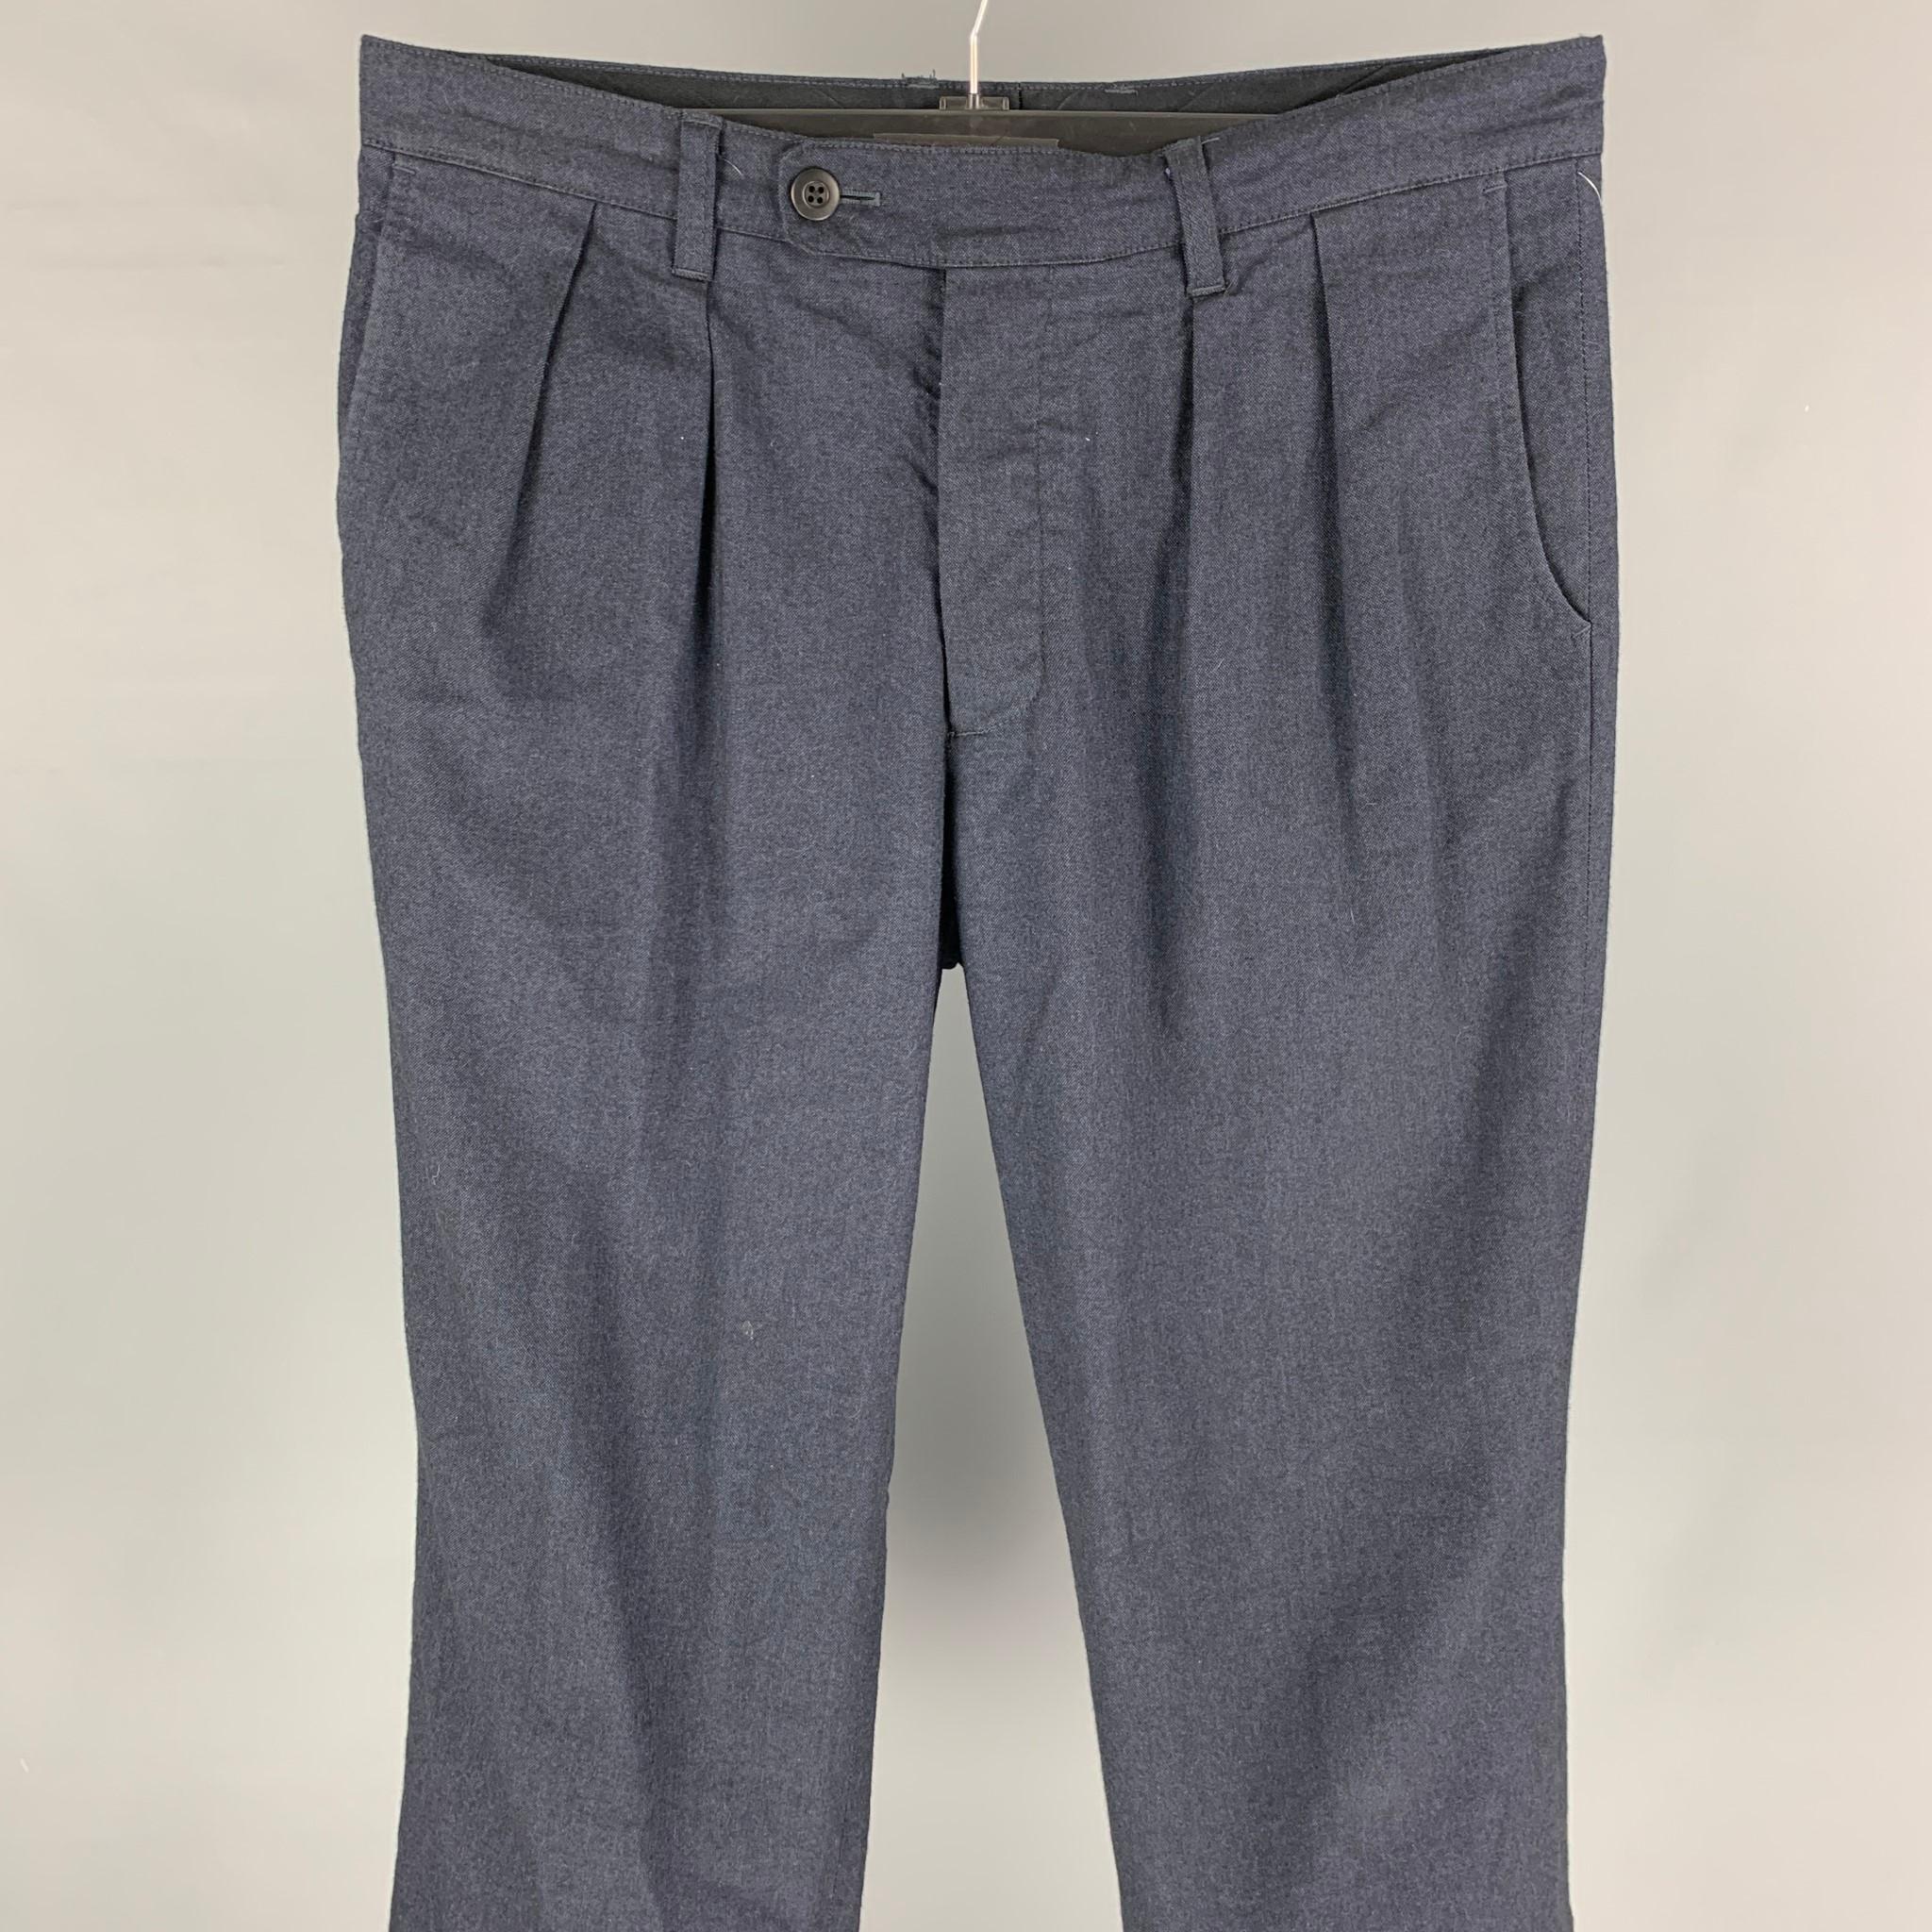 TS (S) dress pants comes in a indigo cotton blend featuring a pleated style, wide leg, cuffed, and a button fly closure. Made in Japan. 

Very Good Pre-Owned Condition.
Marked: 2
Original Retail Price: $440.00

Measurements:

Waist: 34 in.
Rise: